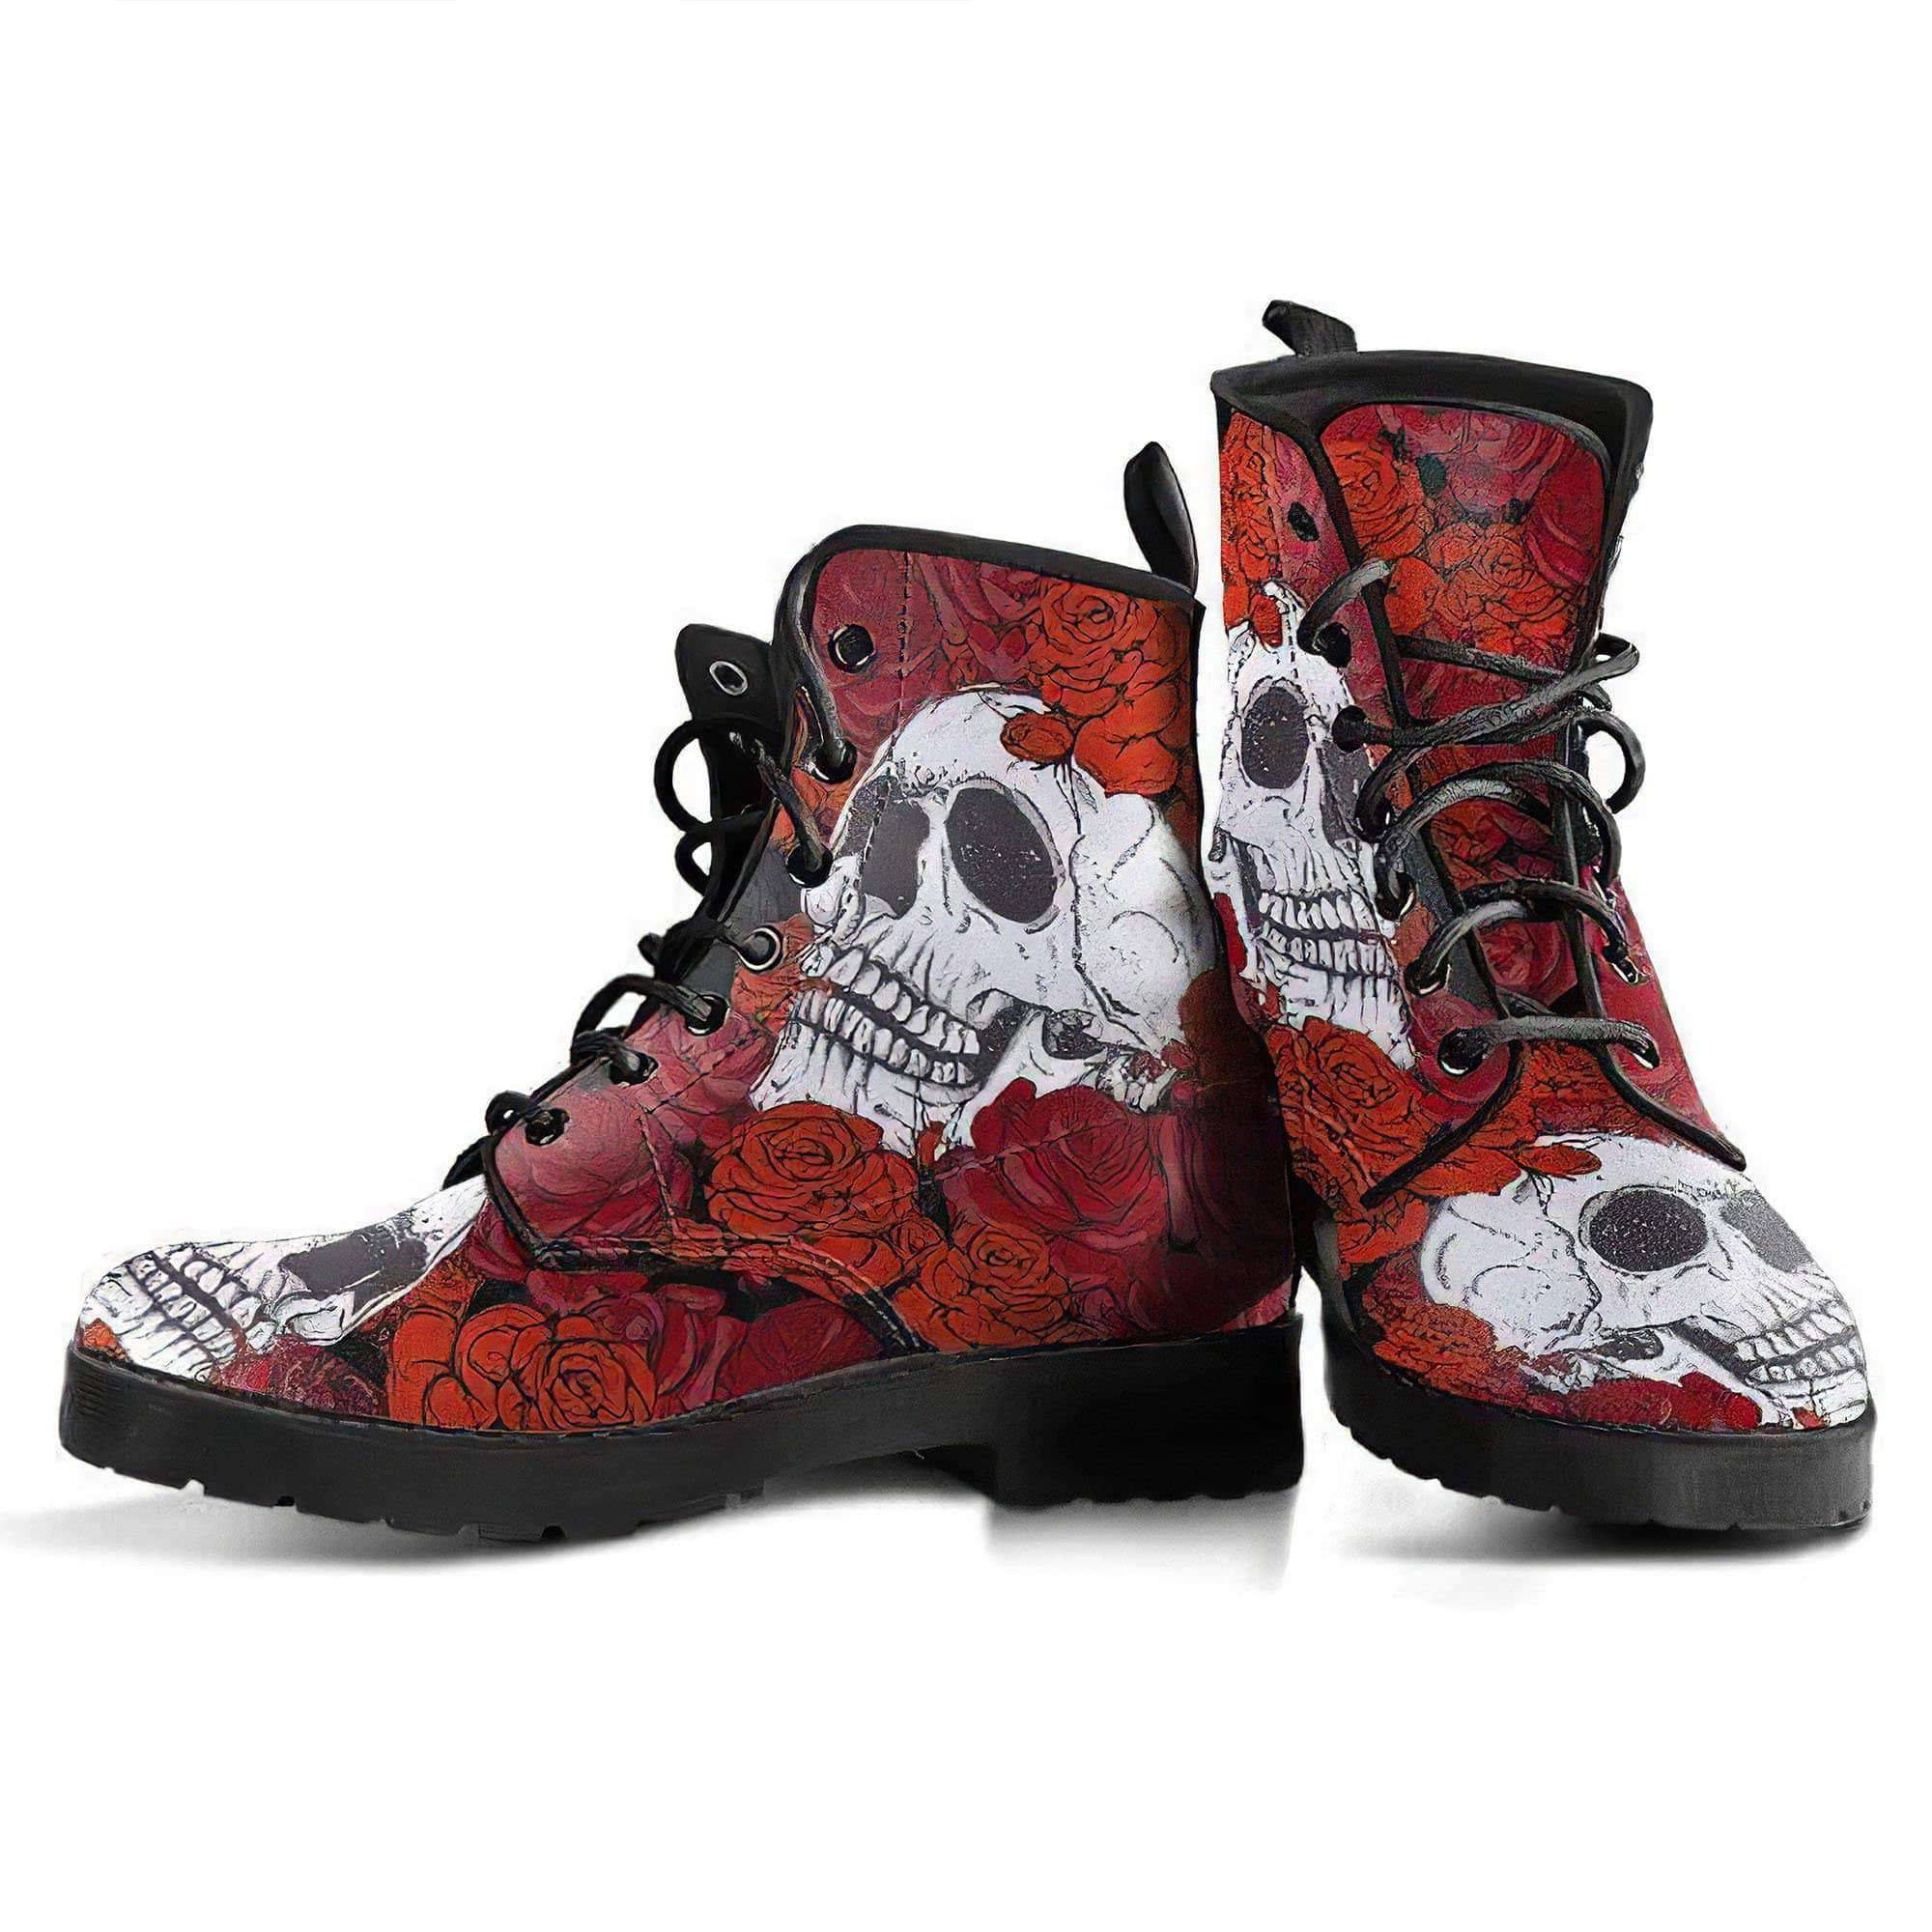 skull-roses-women-s-leather-boots-women-s-leather-boots-12051950370877.jpg